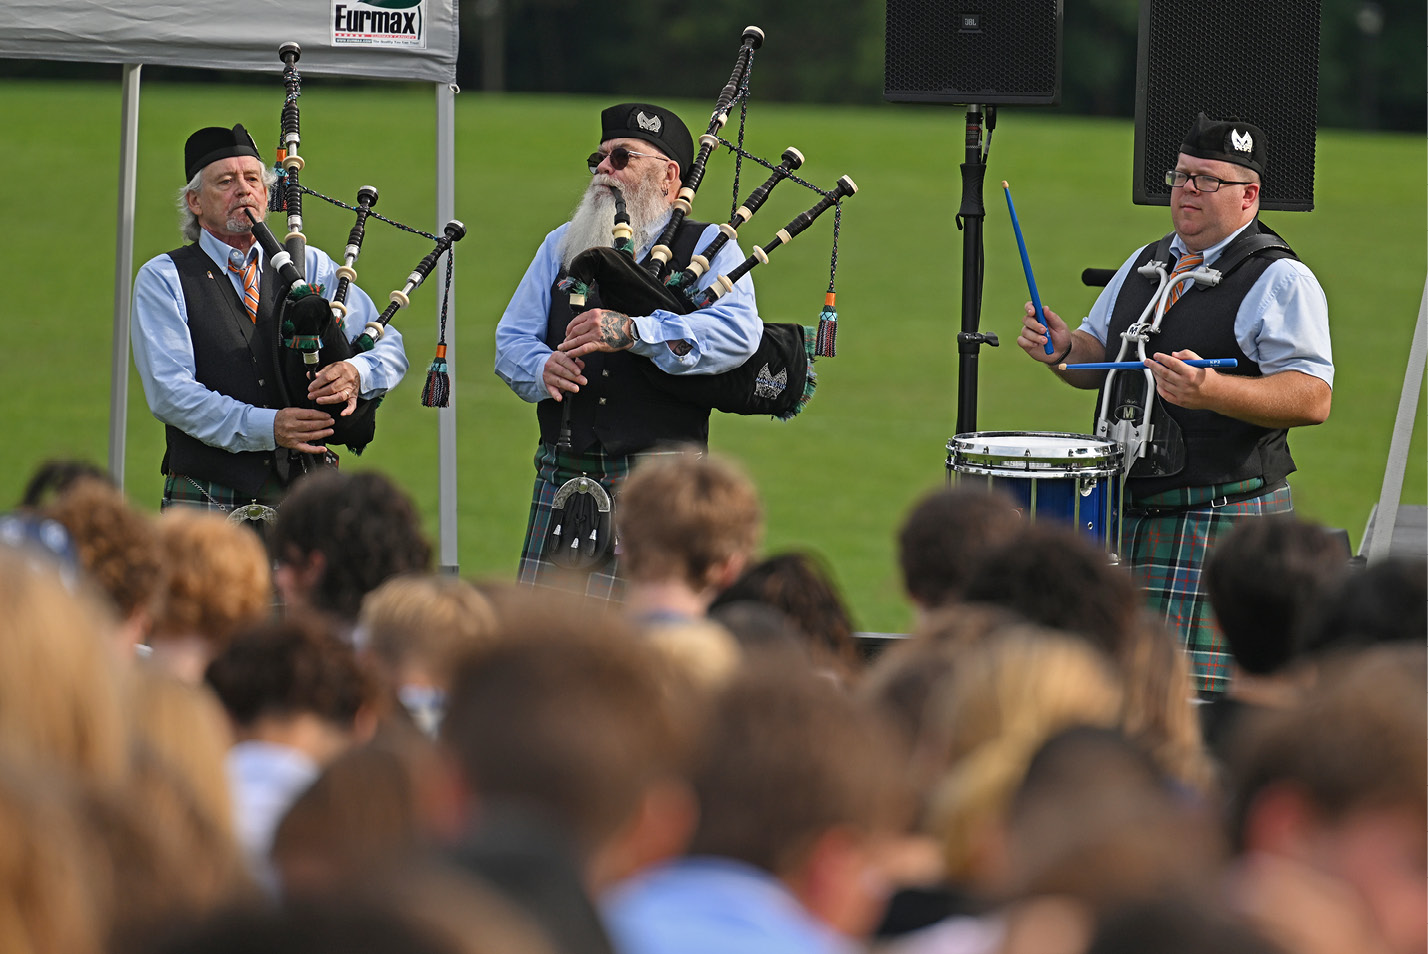 Bagpipers at Convocation